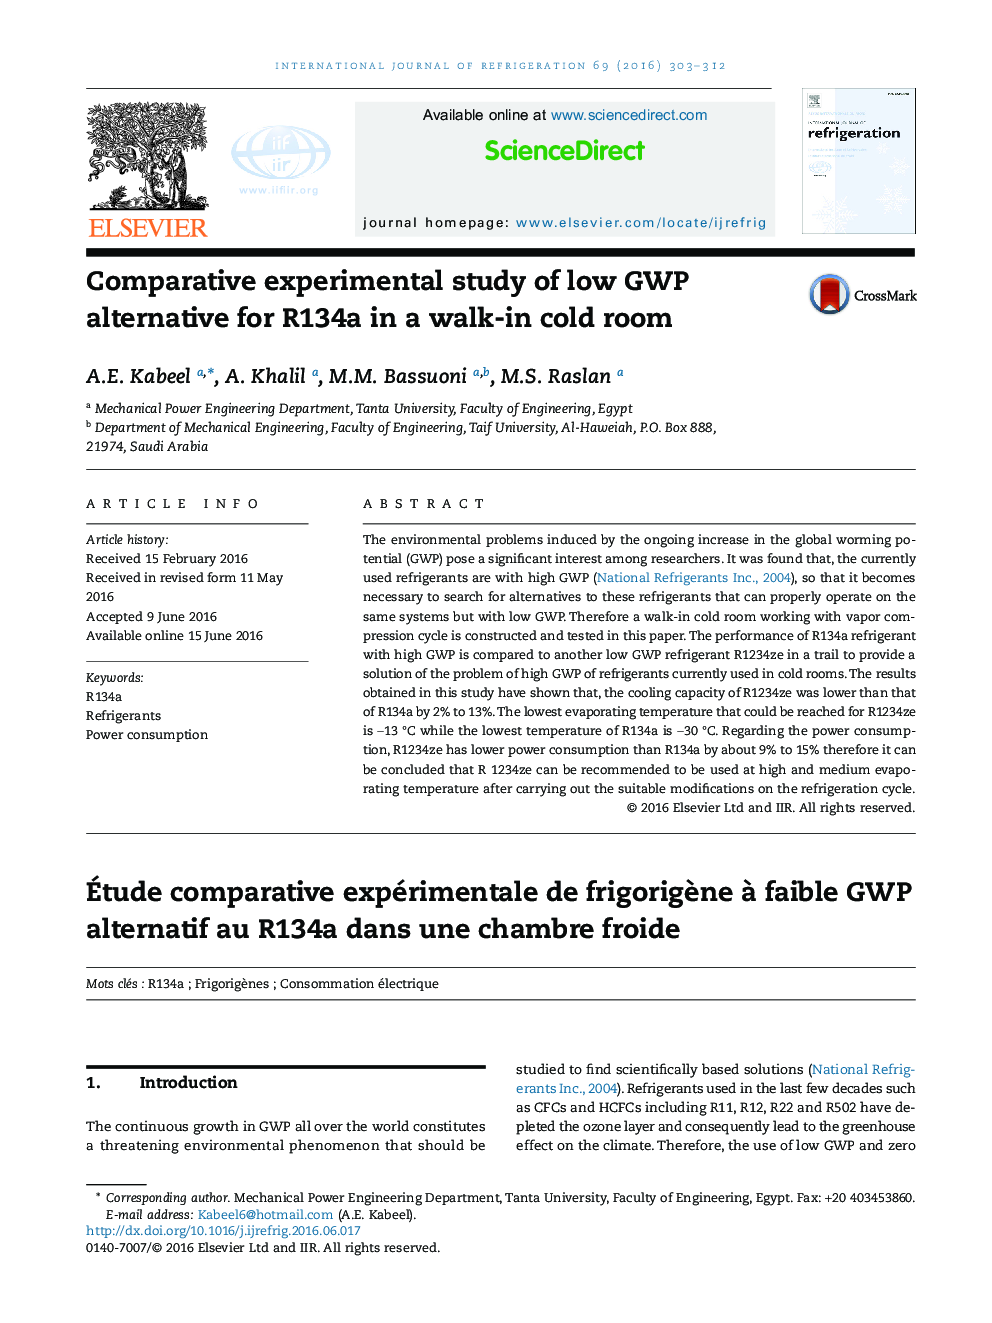 Comparative experimental study of low GWP alternative for R134a in a walk-in cold room